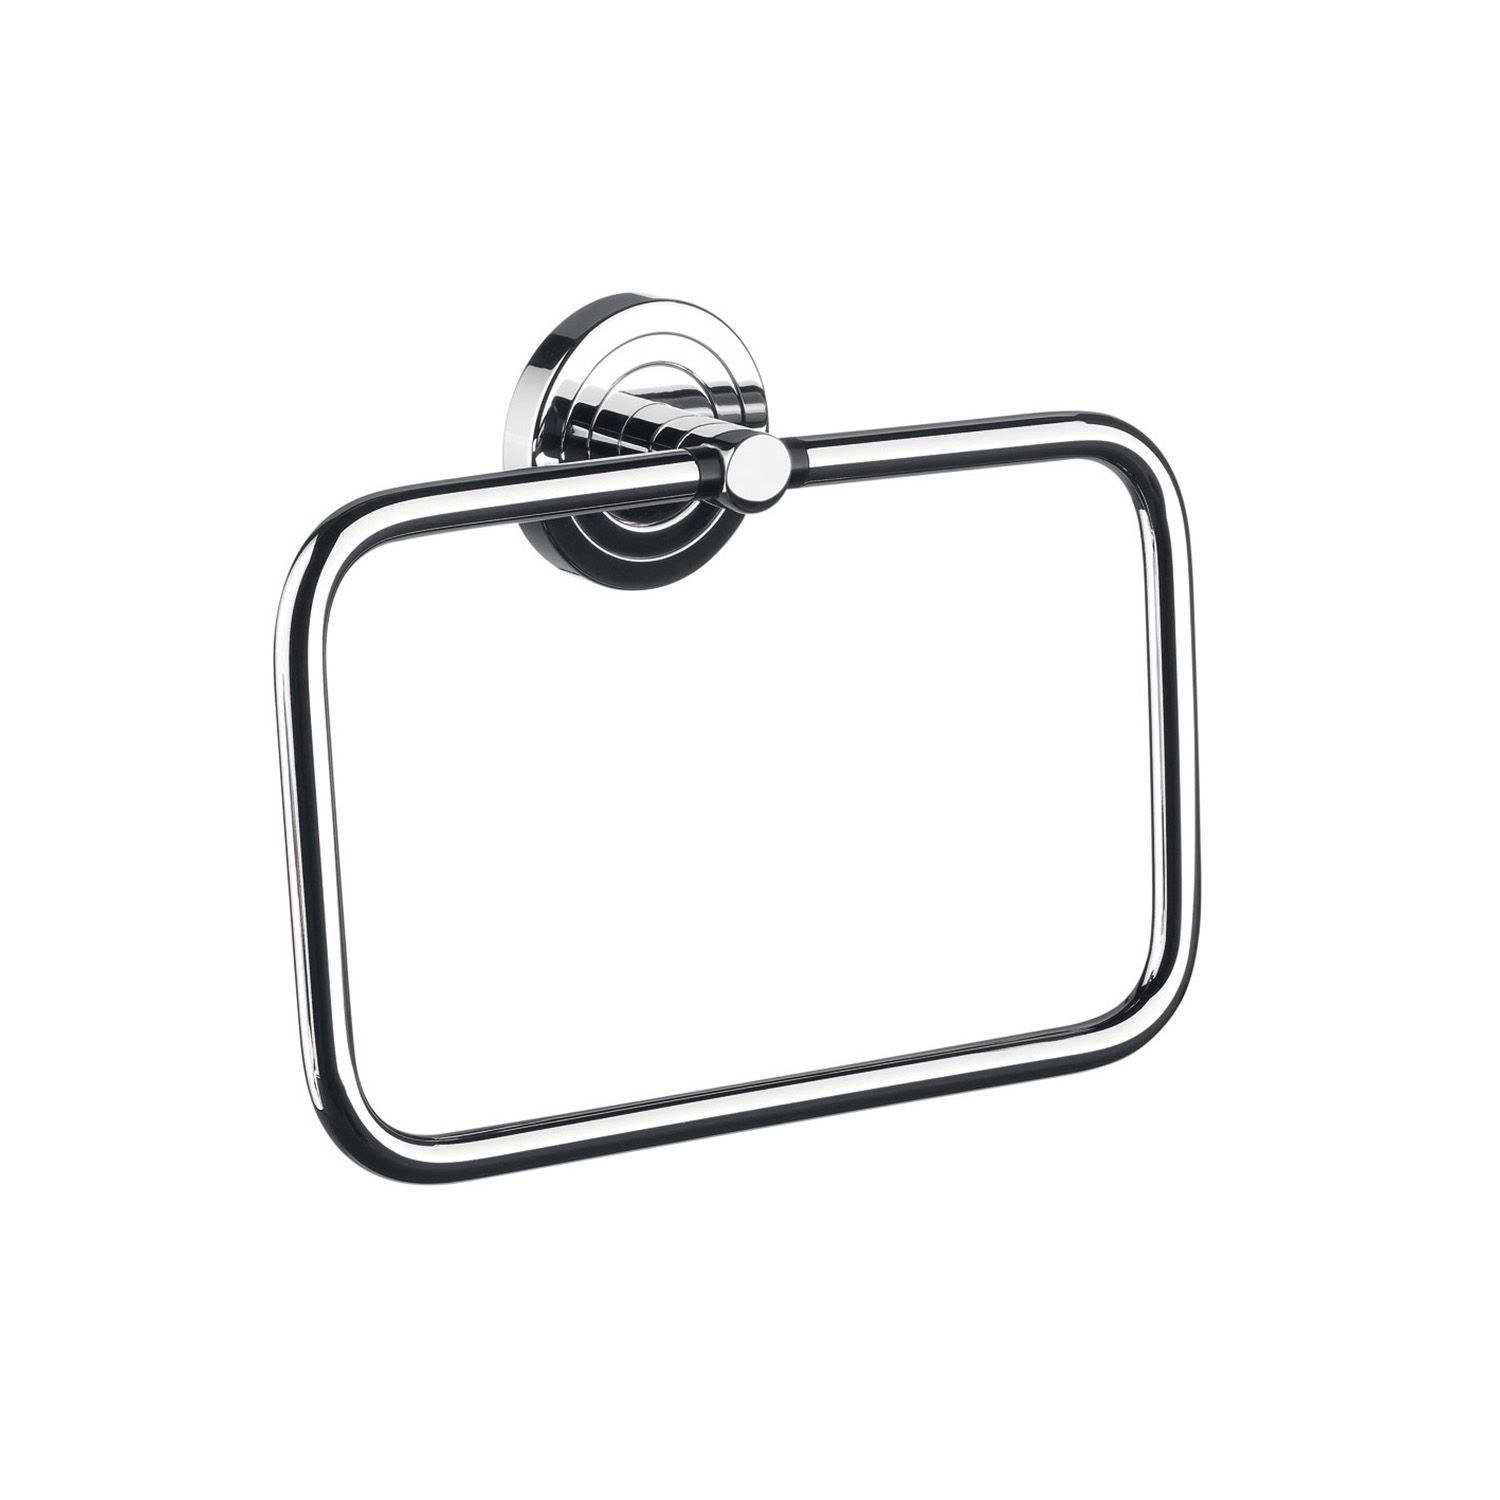 Shopping for Towel Rings - Polo Towel Ring